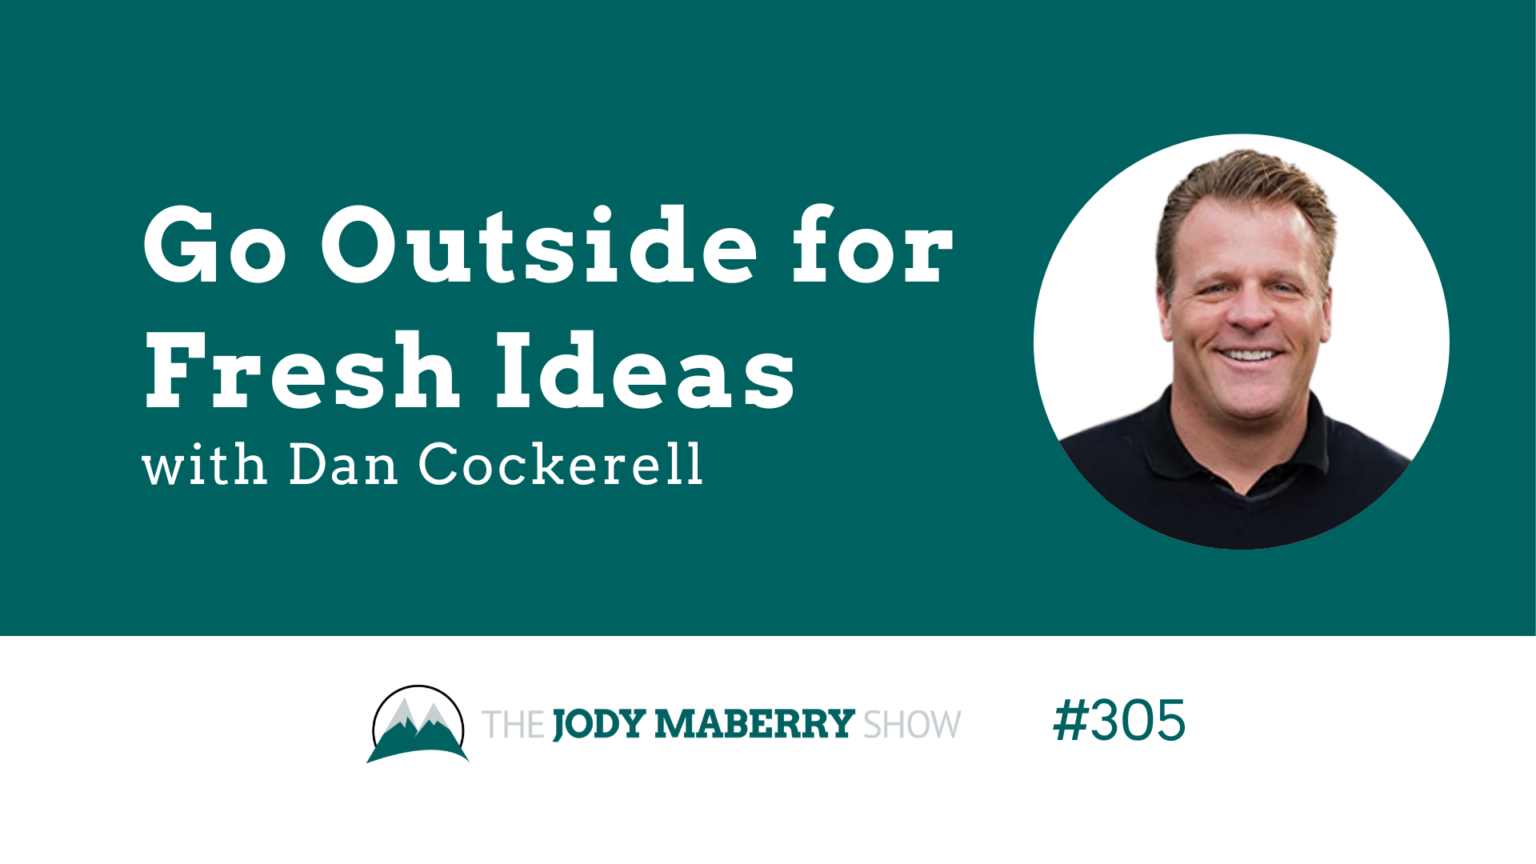 Jody Maberry Show Episode 305 Go Outside for Fresh Ideas